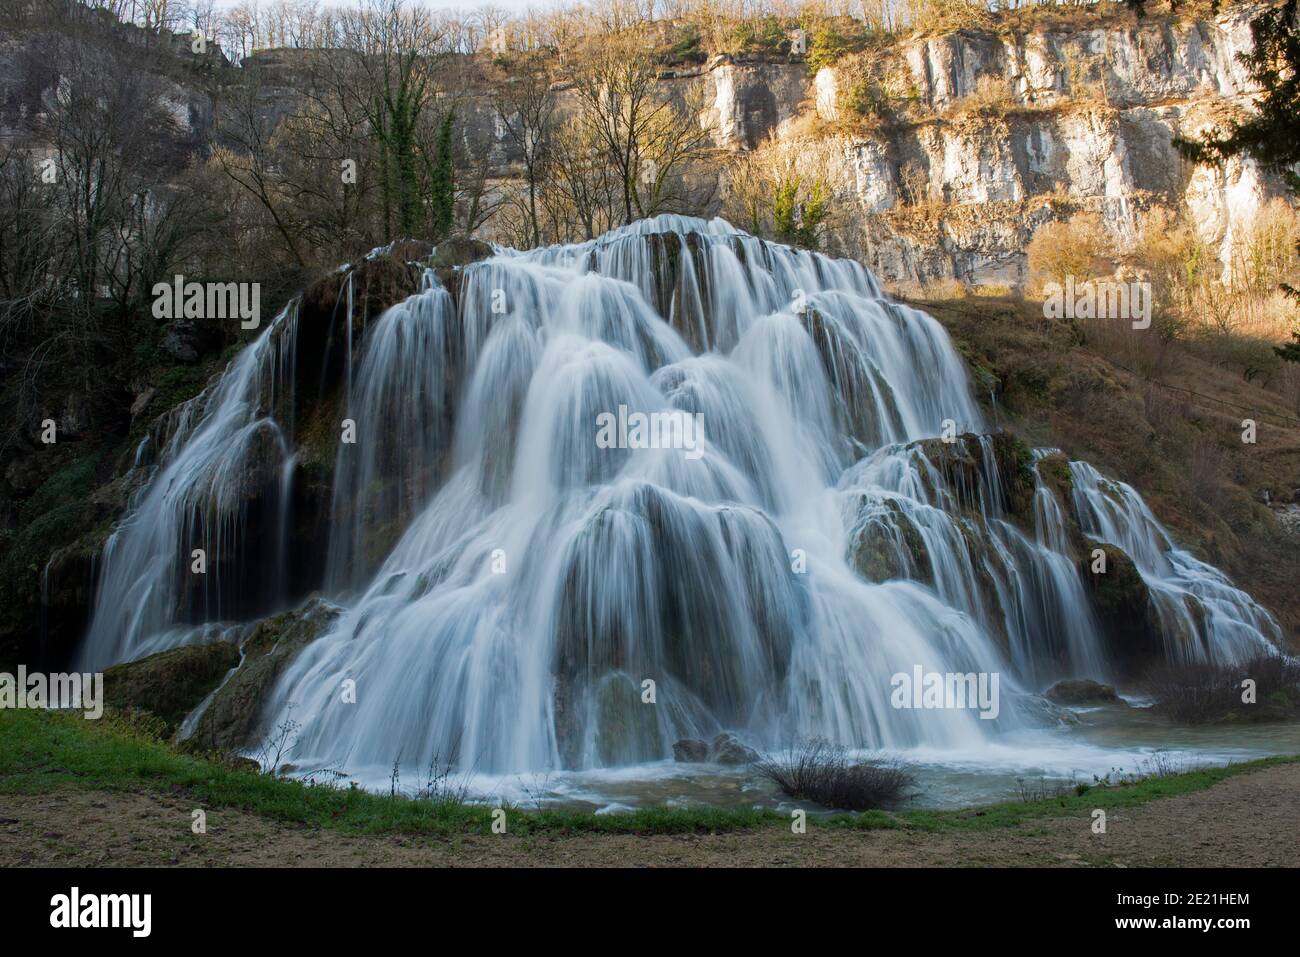 Baume-les-Messieurs (central-eastern France): the “cascade des Tufs” waterfall Stock Photo